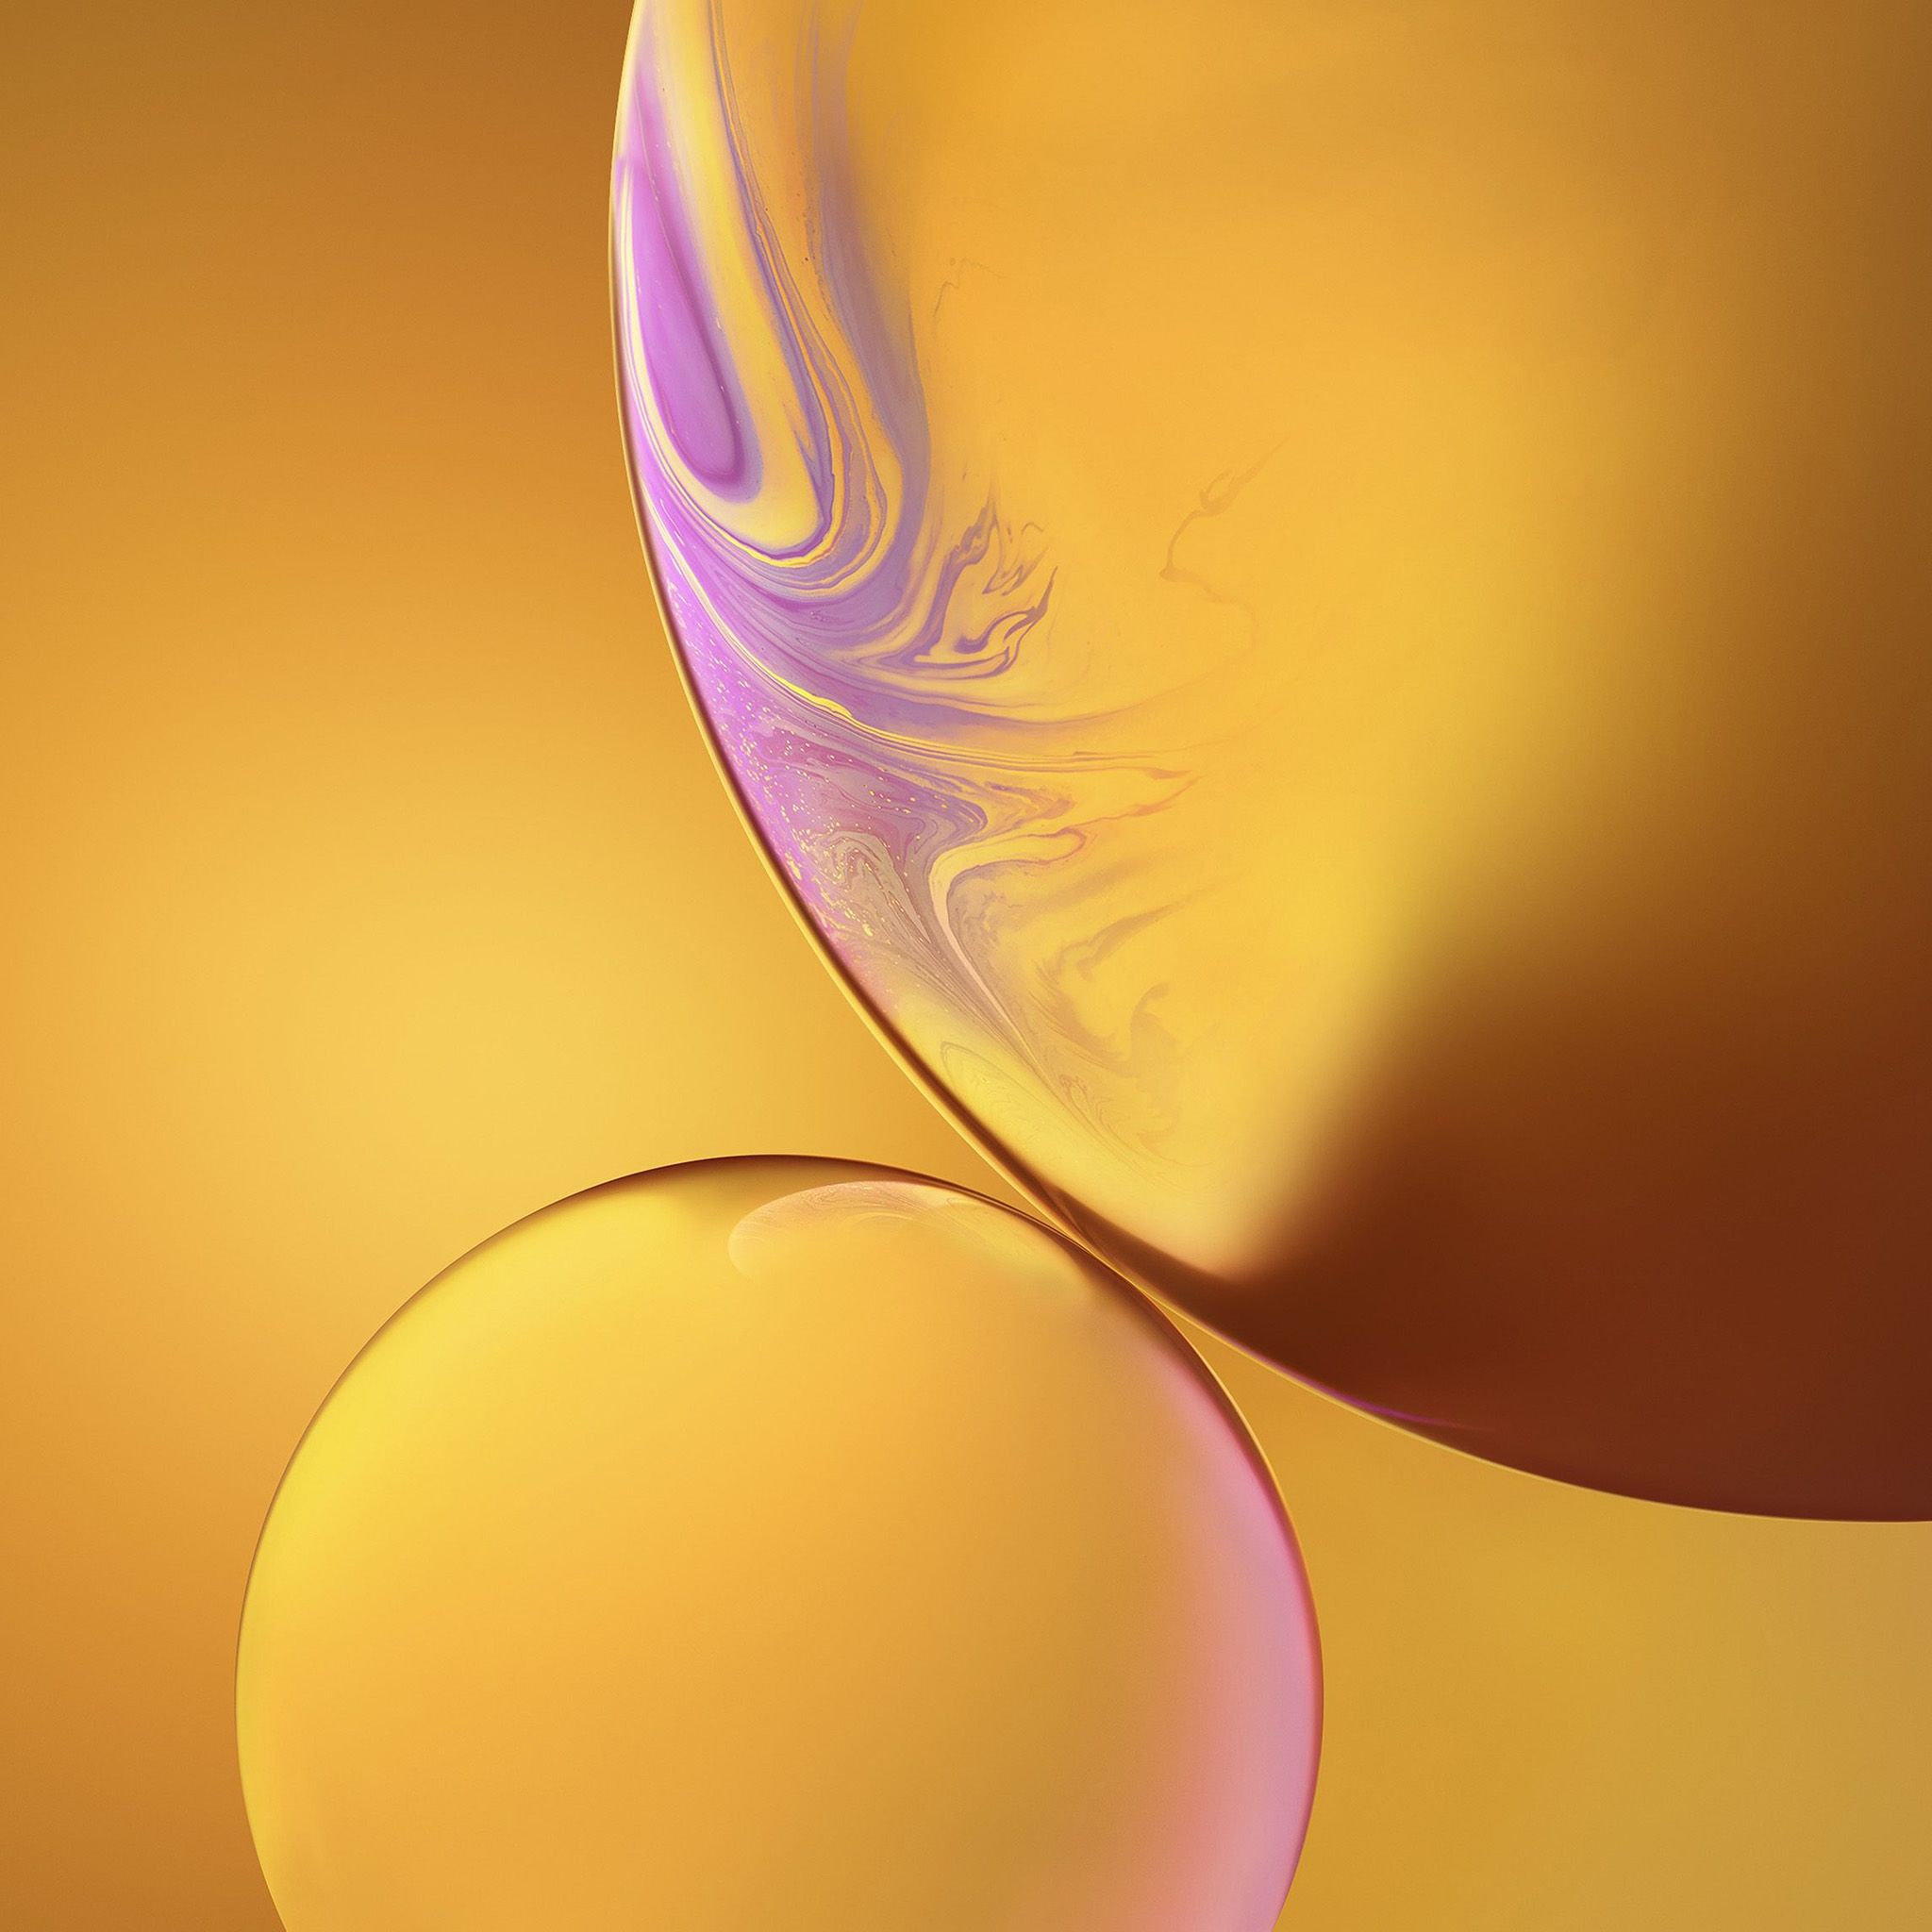 IPhone XR wallpaper featuring a yellow and purple sphere. - Bubbles